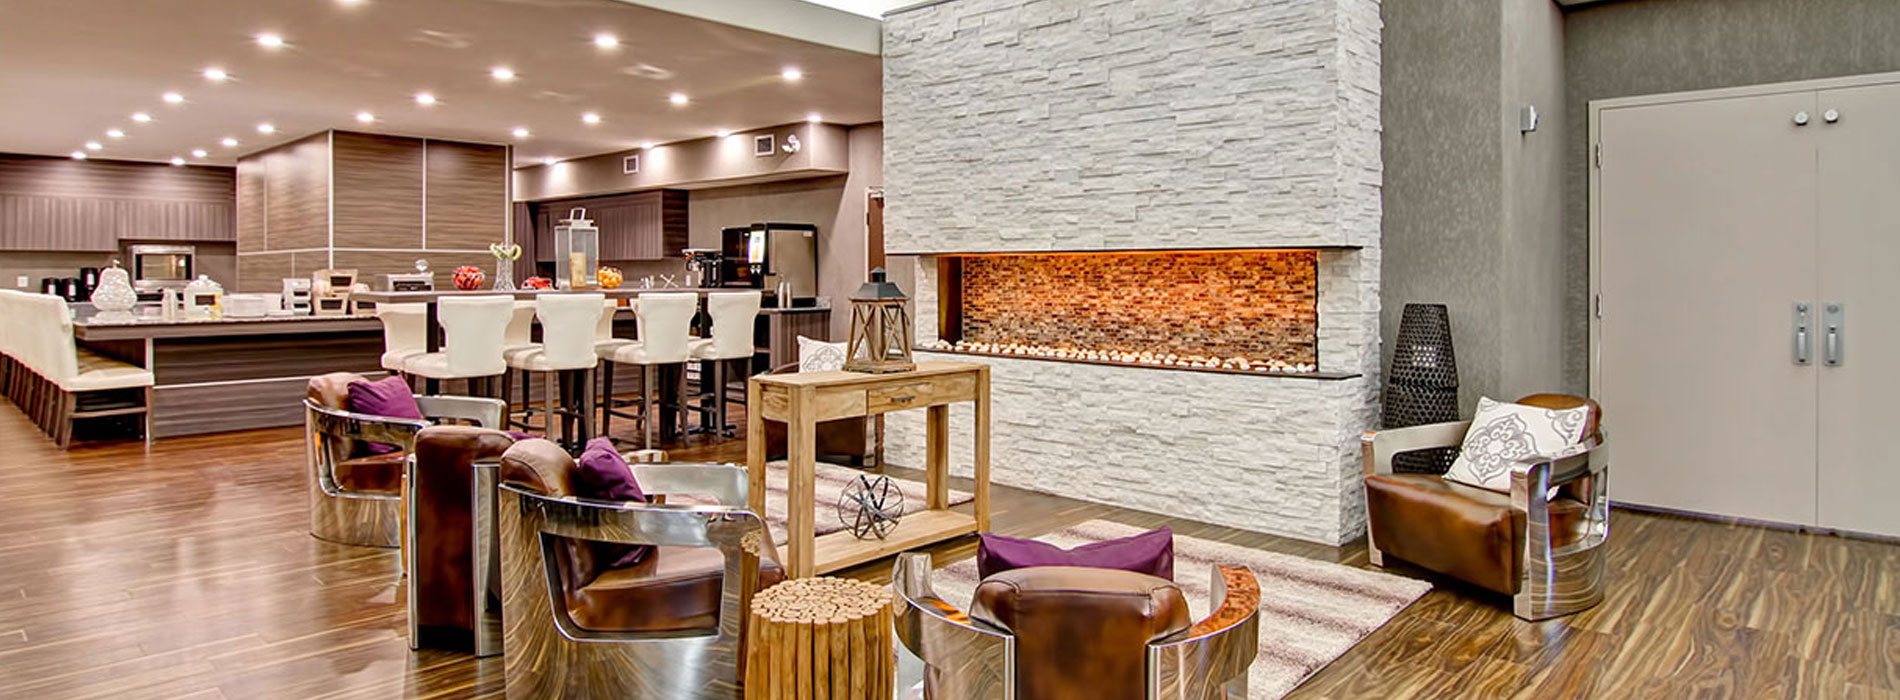 A towering birch white limestone electric fireplace is surrounded by leather club chairs, tree stump side tables, area rugs and a rustic console table bearing metal and wood décor items in the lounging space at d3h Home Inn & Suites Swift Current.  In the background, the wood grain laminate interior of the breakfast area can be seen among neat rows of white upholstered Parsons dining chairs.